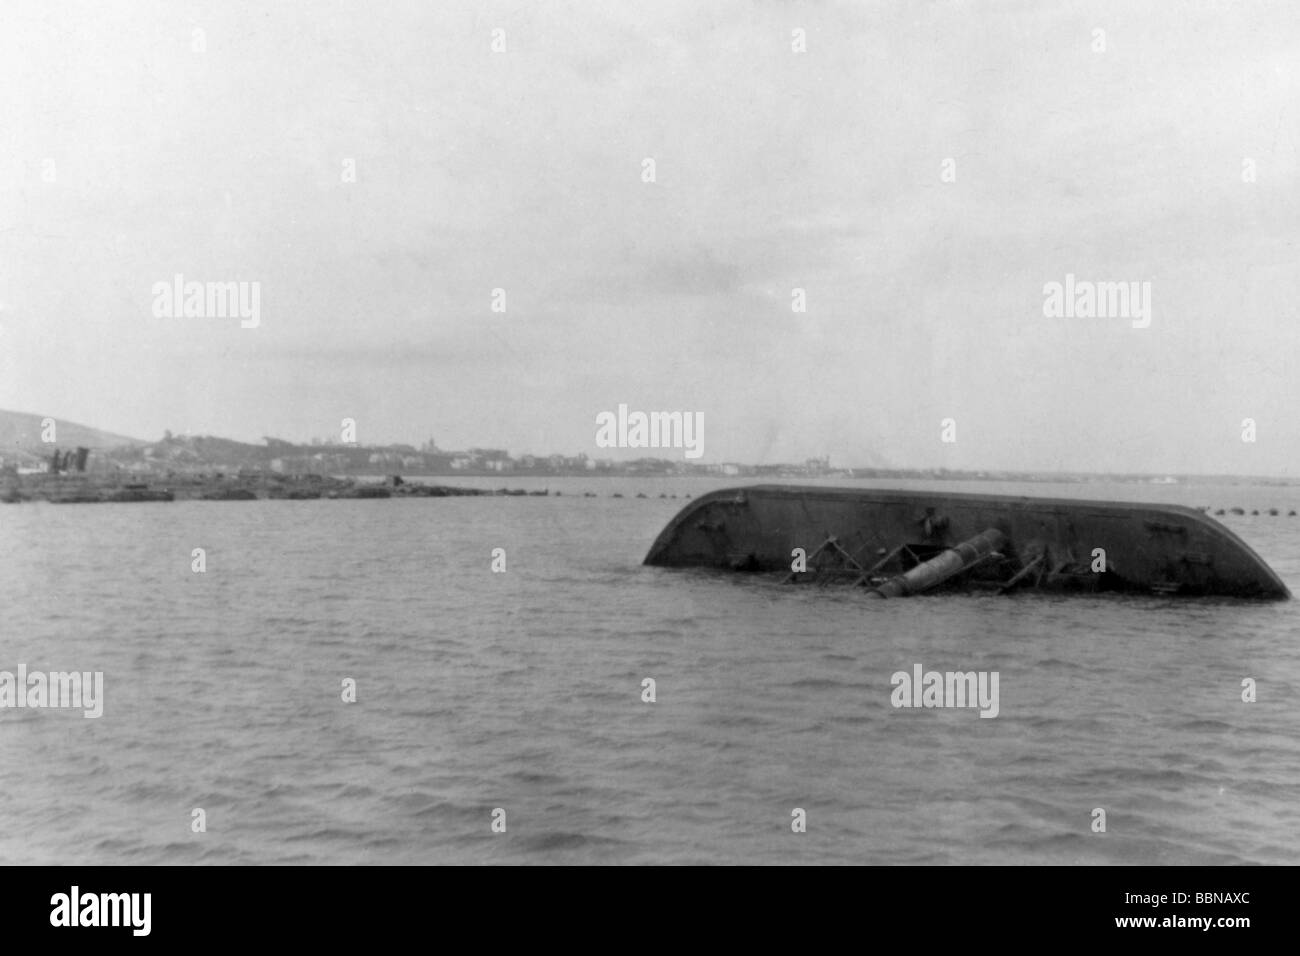 events, Second World War / WWII, Russia 1944 / 1945, Crimea, capsized boat in the harbour of Sevastopol, spring 1944, 20th century, historic, historical, Eastern Front, USSR, Soviet Union, Ukraine, destroyed, destruction, ship, boats, ships, port, 1940s, Stock Photo